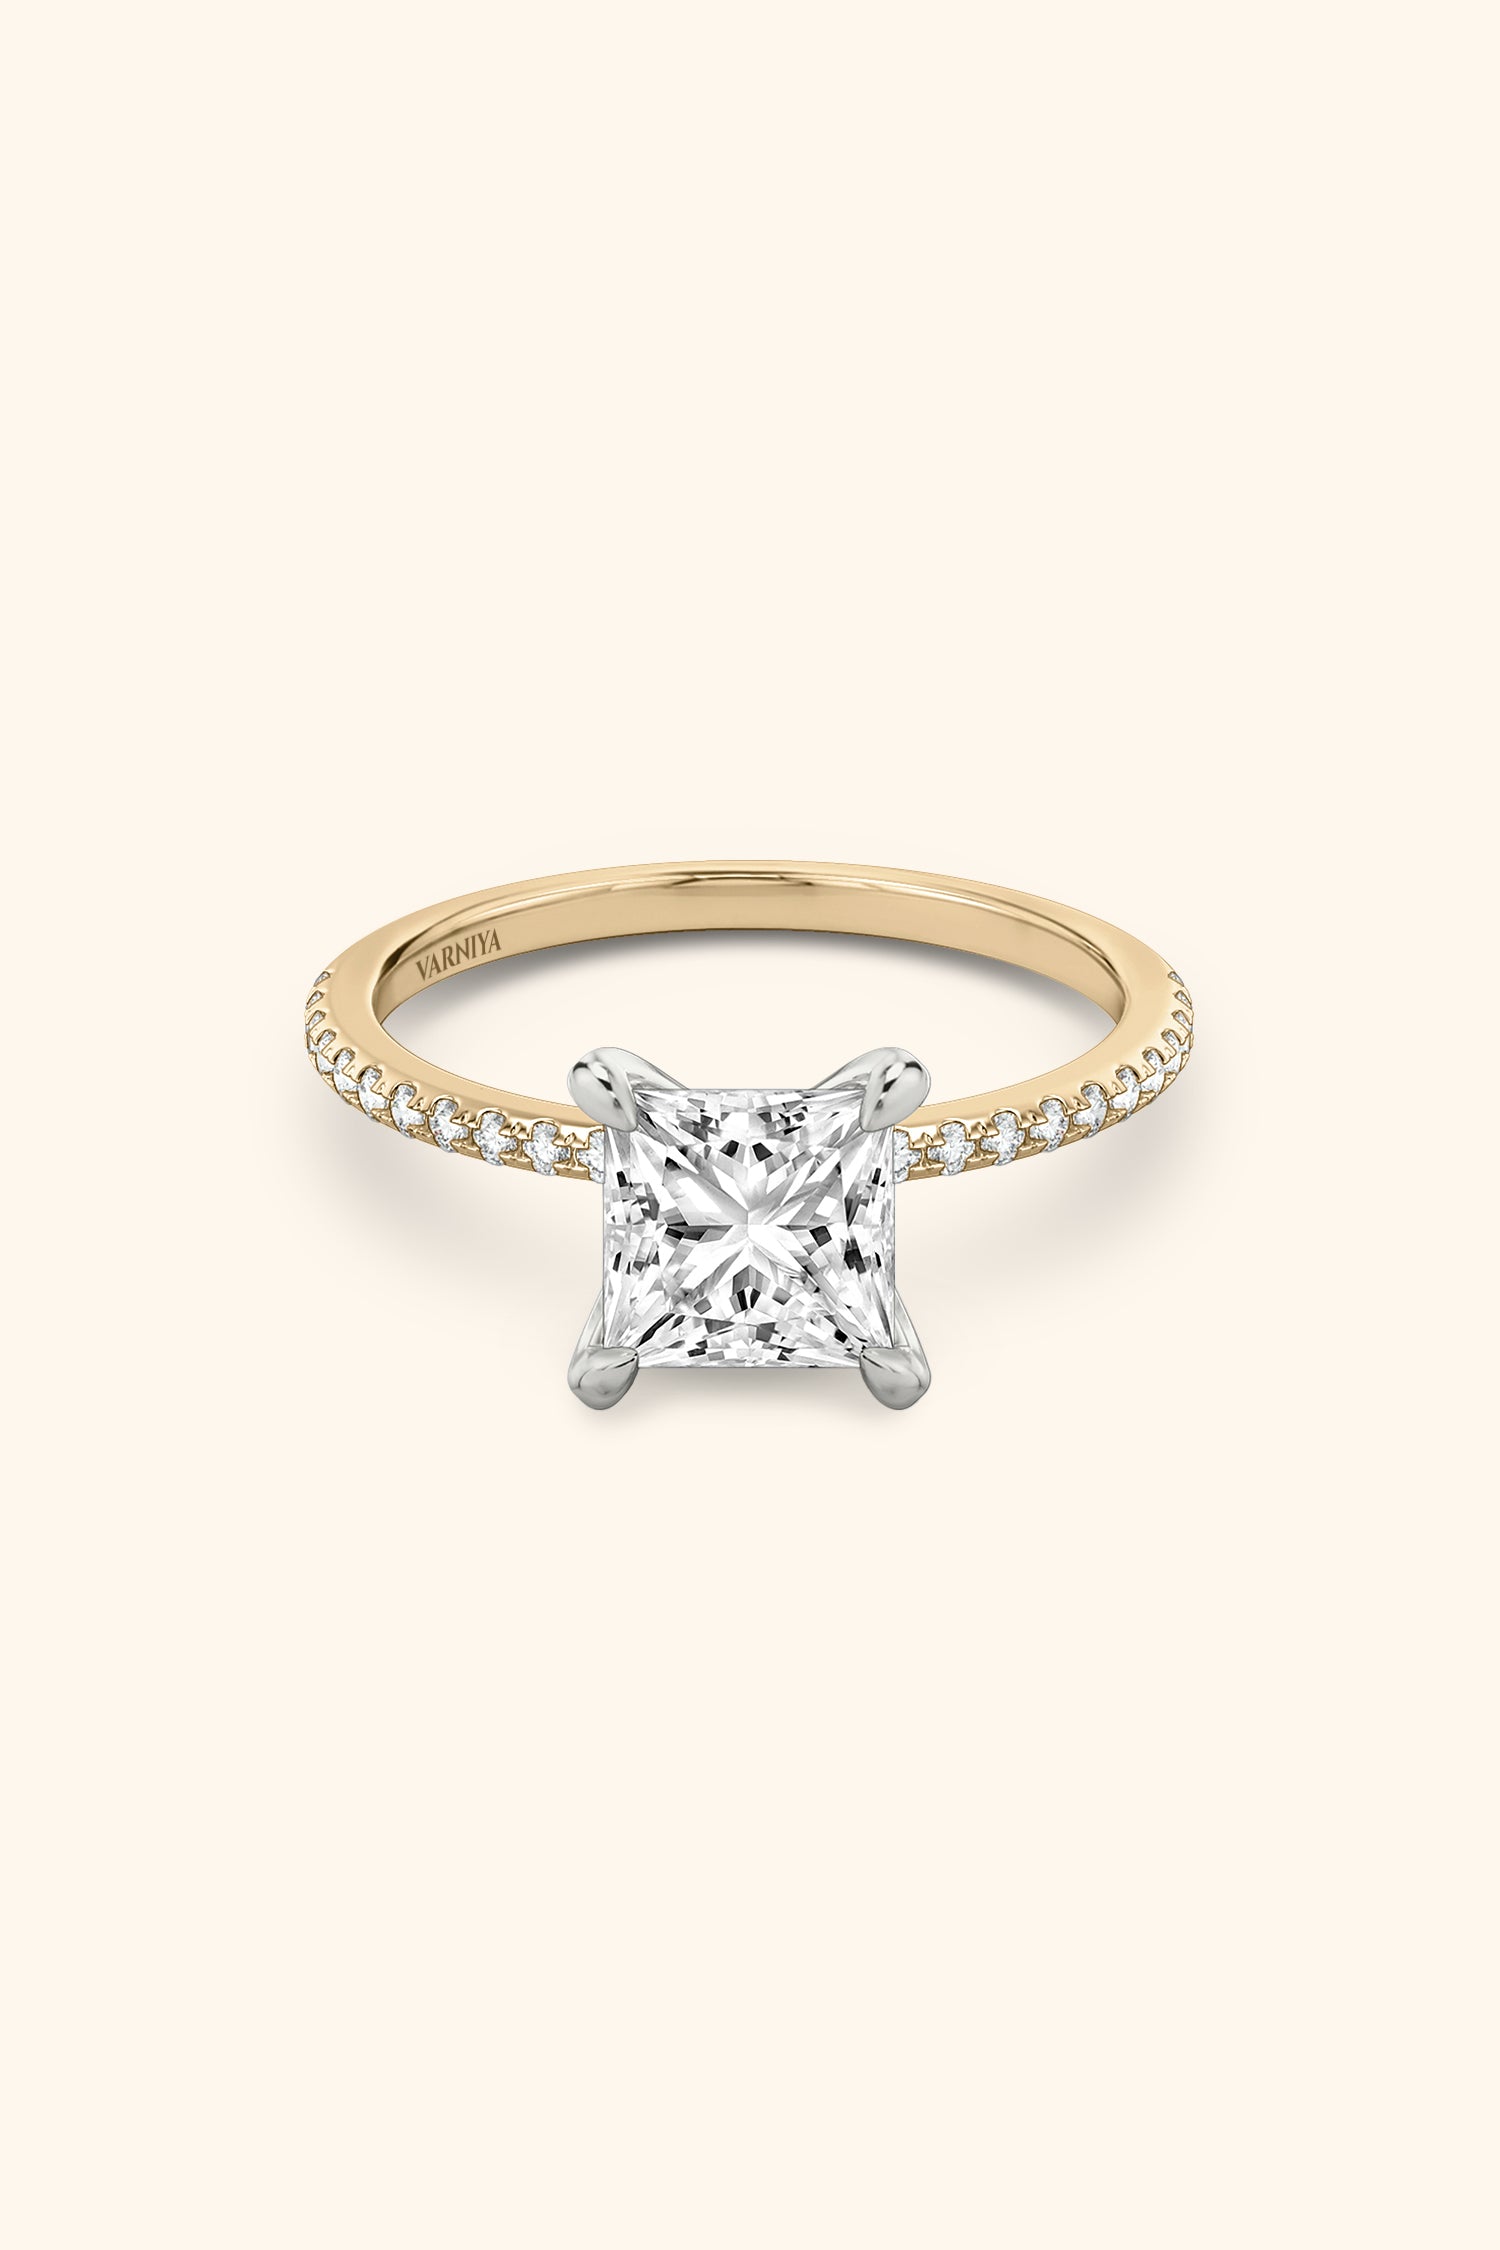 Dual Tone Glance Pavé Ring with 1 Carat Princess Solitaire